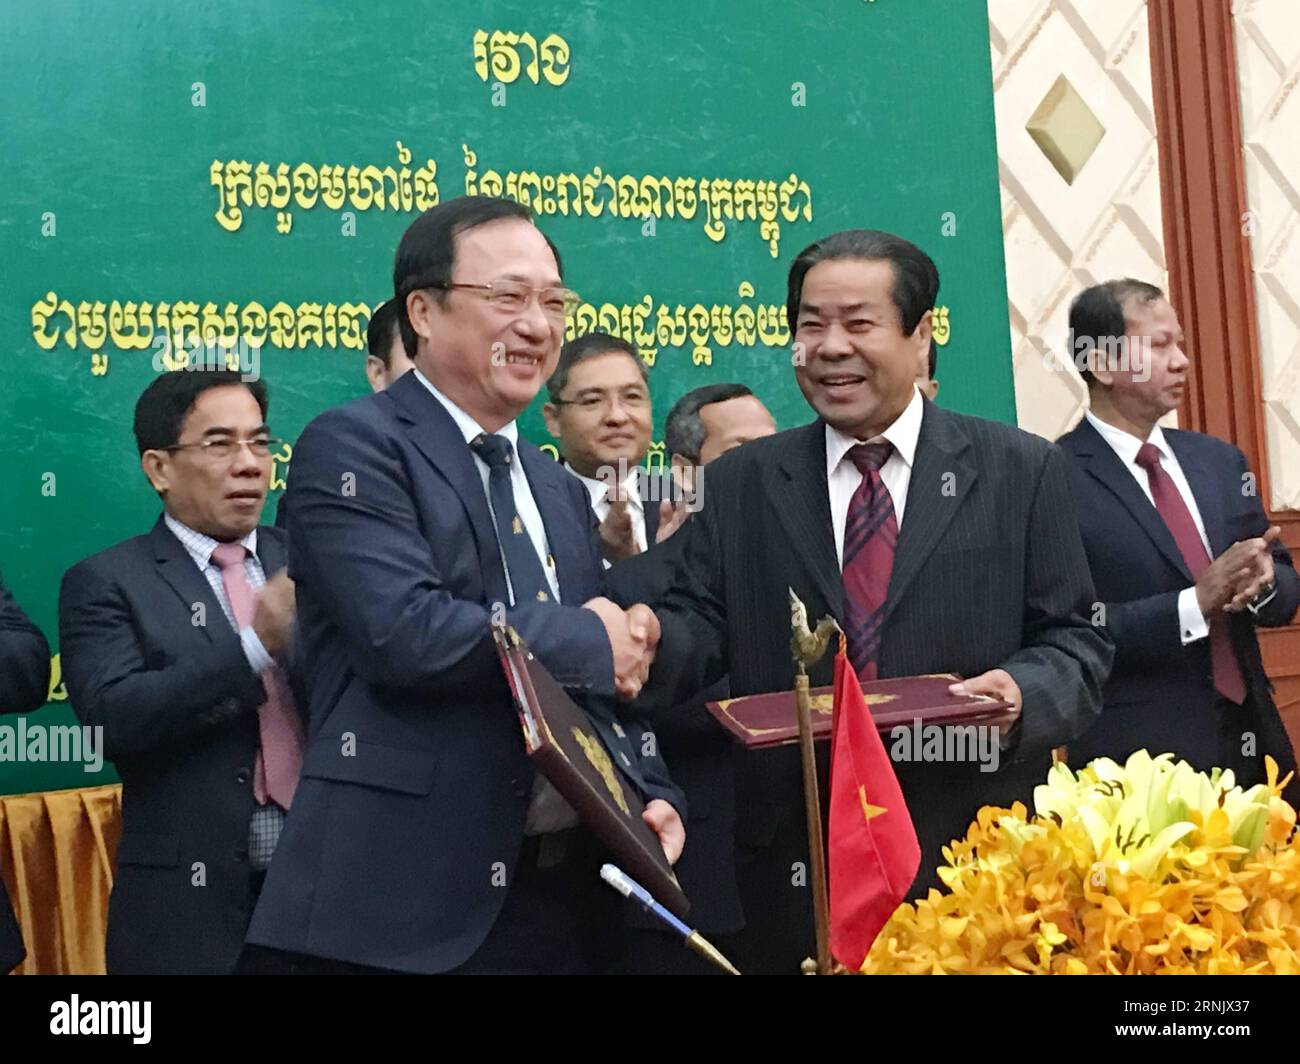 (170217) -- PHNOM PENH, Feb. 17, 2017 -- Cambodian Interior Ministry secretary of state Em Sam An (R, front) shakes hands with Vietnamese Public Security Ministry deputy minister Nguyen Van Thanh (L, front) in Phnom Penh, Cambodia, on Feb. 17, 2017. Cambodia and Vietnam on Friday pledged to further enhance their bilateral cooperation in public security, combating cross-border crimes, and police training. ) (sxk) CAMBODIA-PHNOM PENH-VIETNAM-COOPERATION Sovannara PUBLICATIONxNOTxINxCHN   Phnom Penh Feb 17 2017 Cambodian Interior Ministry Secretary of State euro Sat to r Front Shakes Hands With V Stock Photo